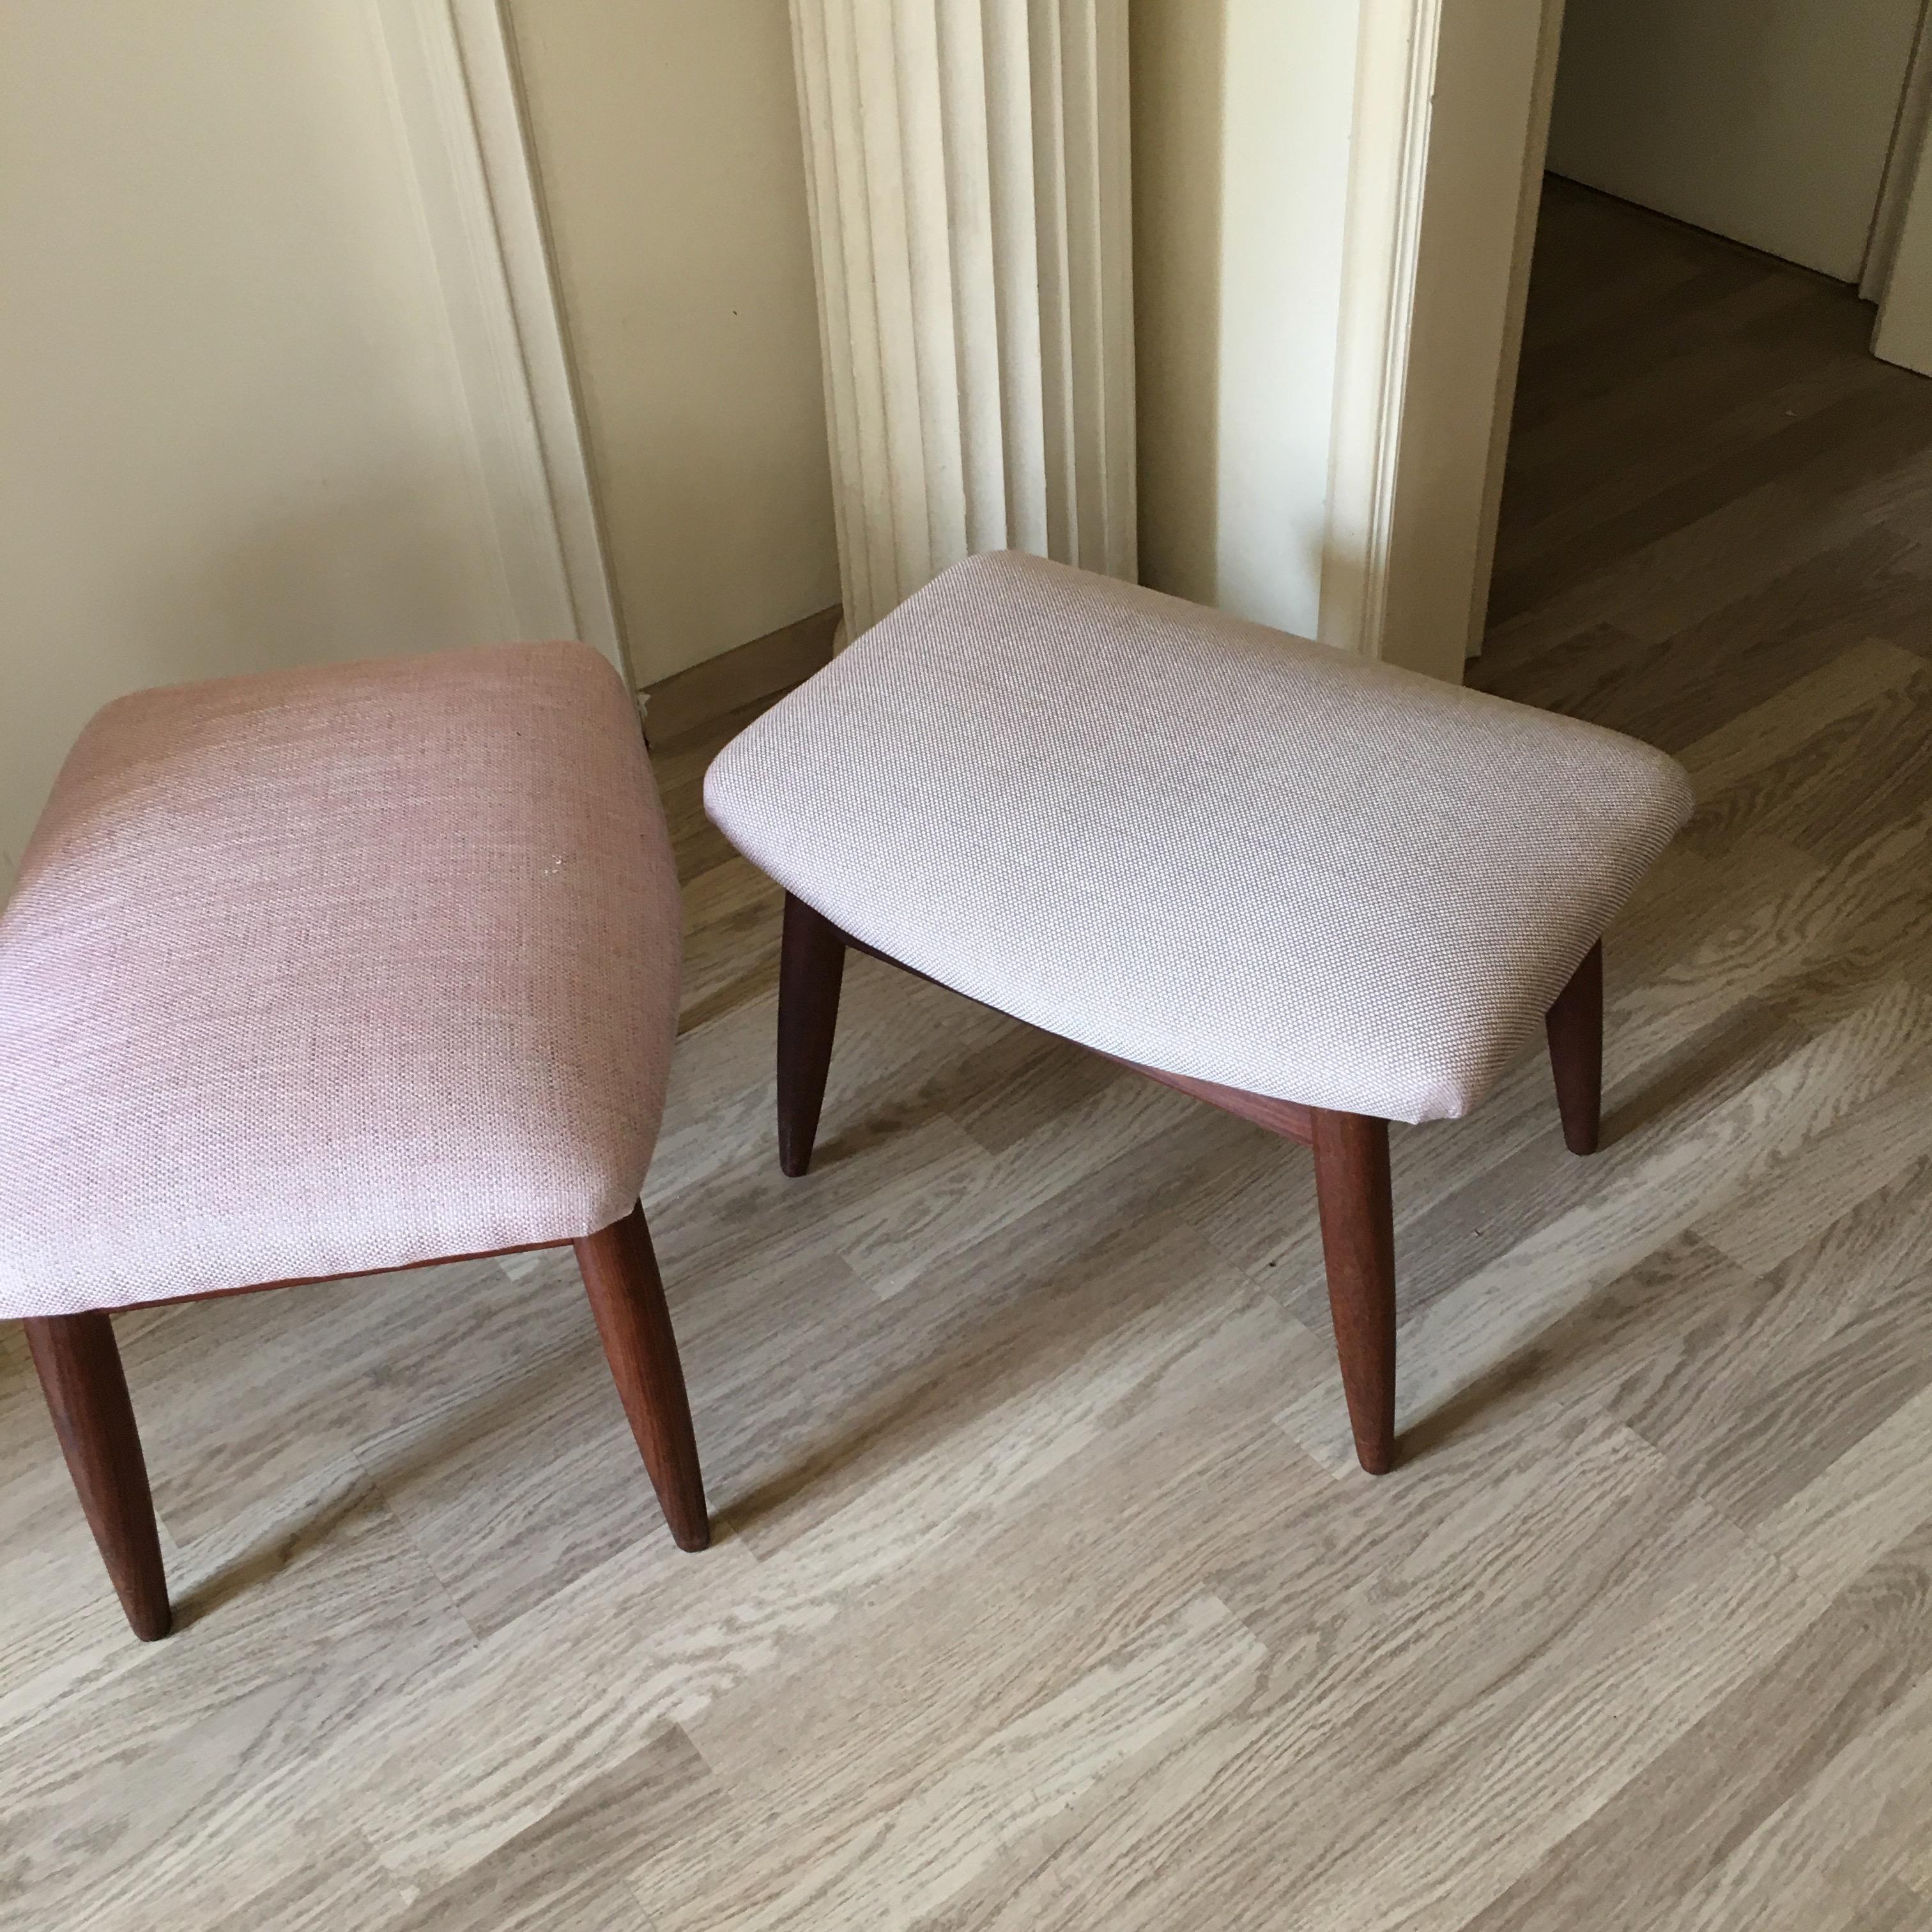 Fine pair of danish teak stools recovered with a beige rosé fabric.
Designed by Poul Volter around 1960.